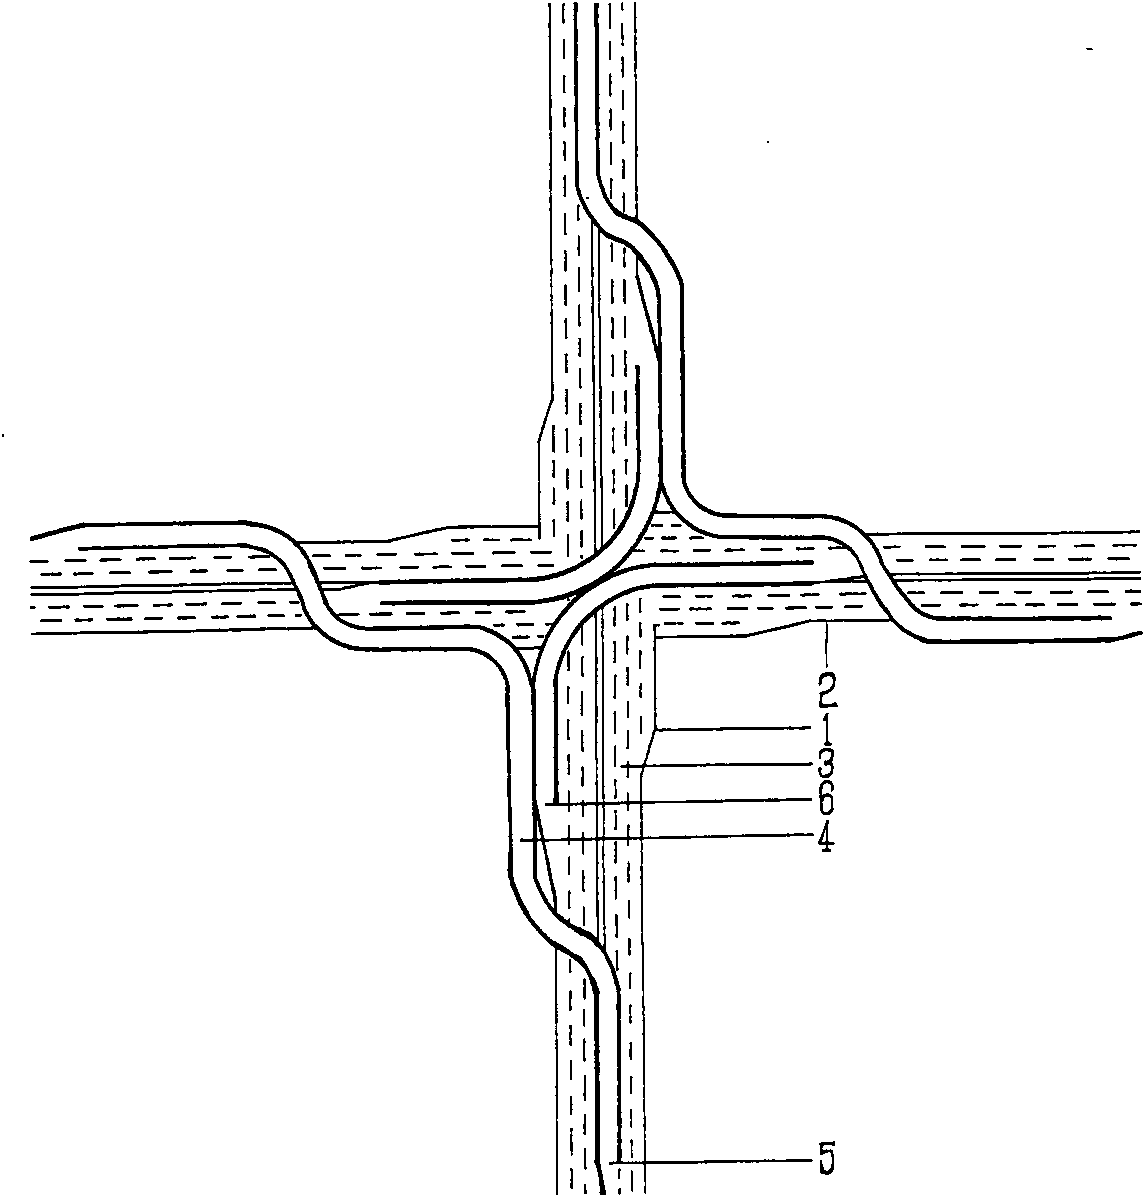 Offset intersection overpass with preposed left turning for crossroad